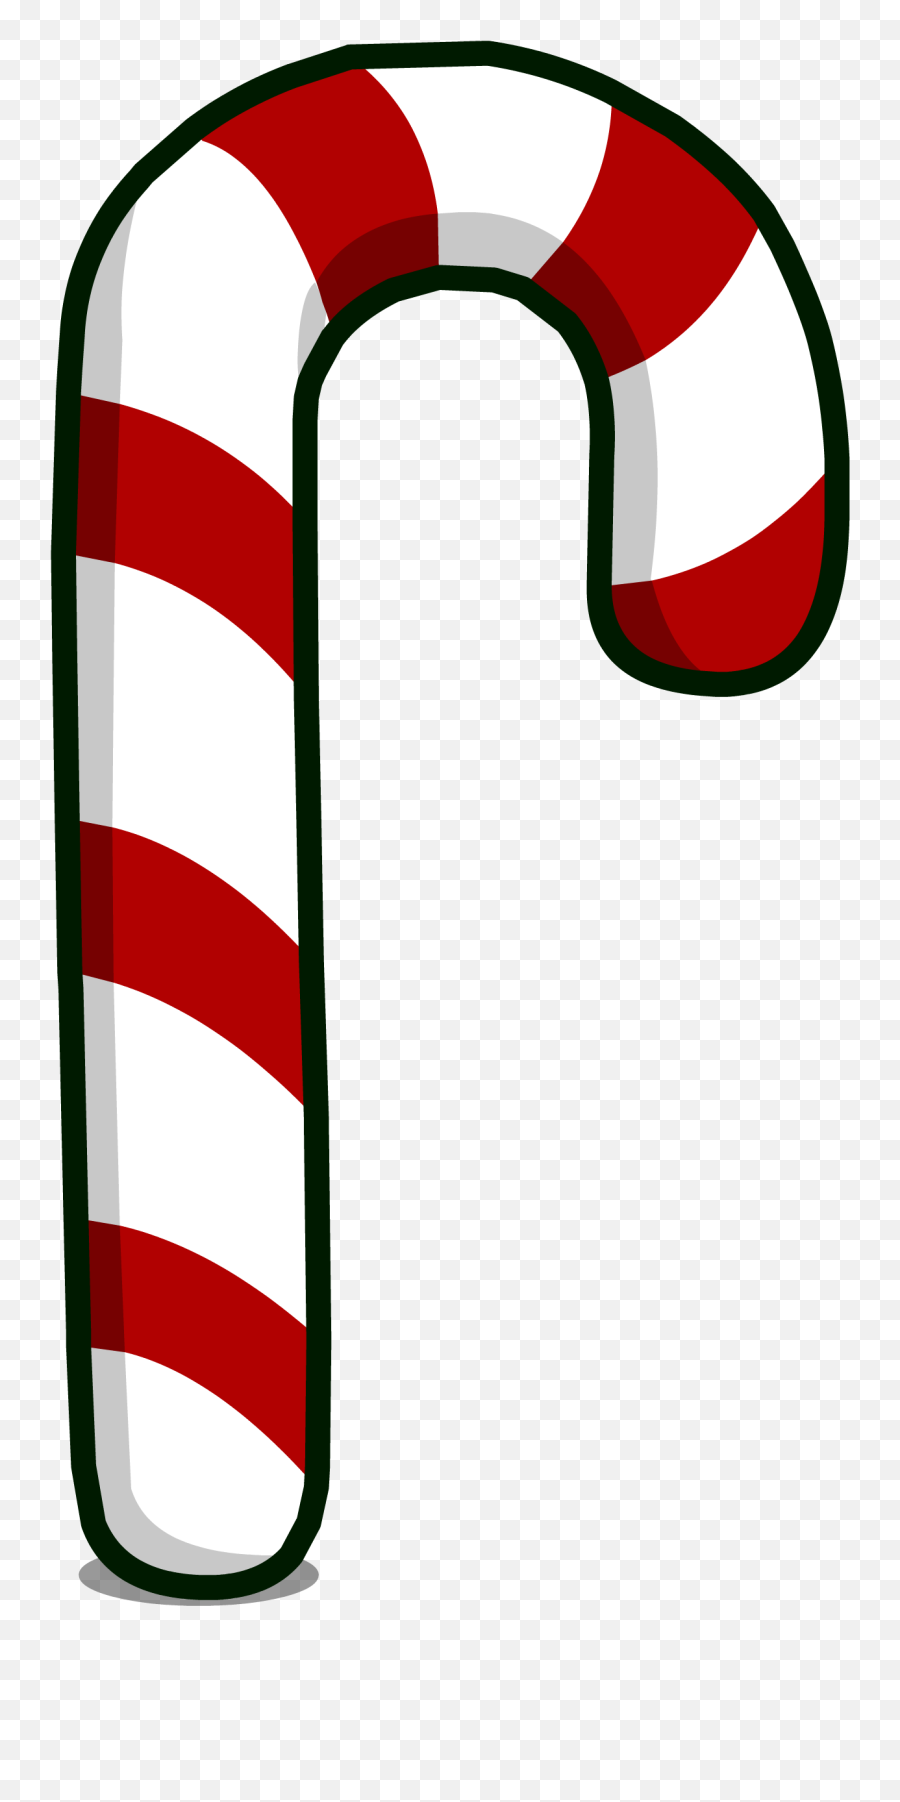 Giant Candy Cane Sprite 002 - Candy Cane Png Clipart,Cane Png